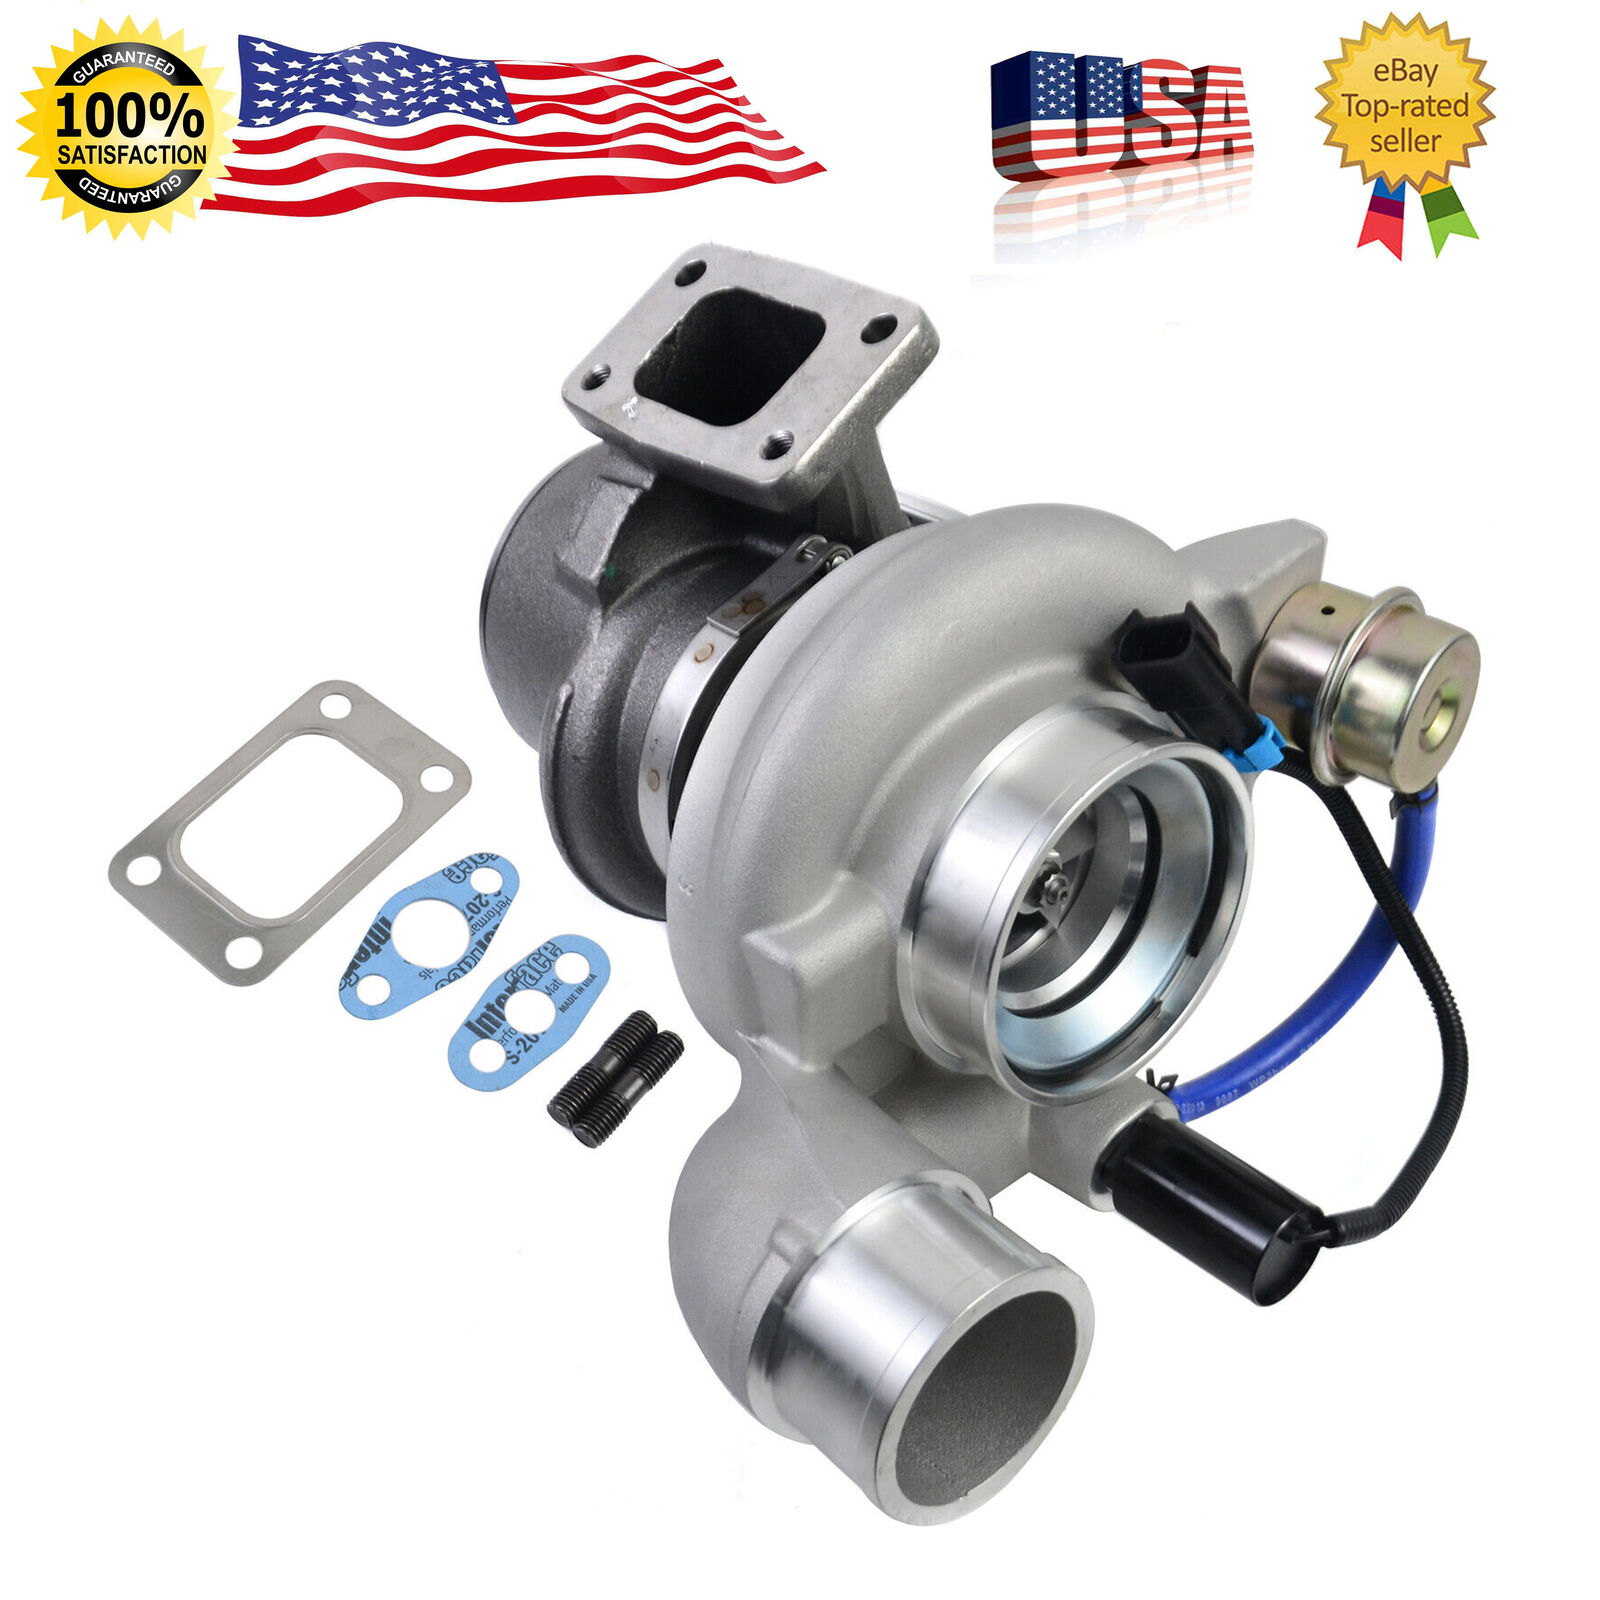 HE351CW Turbo Charger &Actuator For 04-07 Dodge Ram 2500 3500 Diesel Cummins 5.9